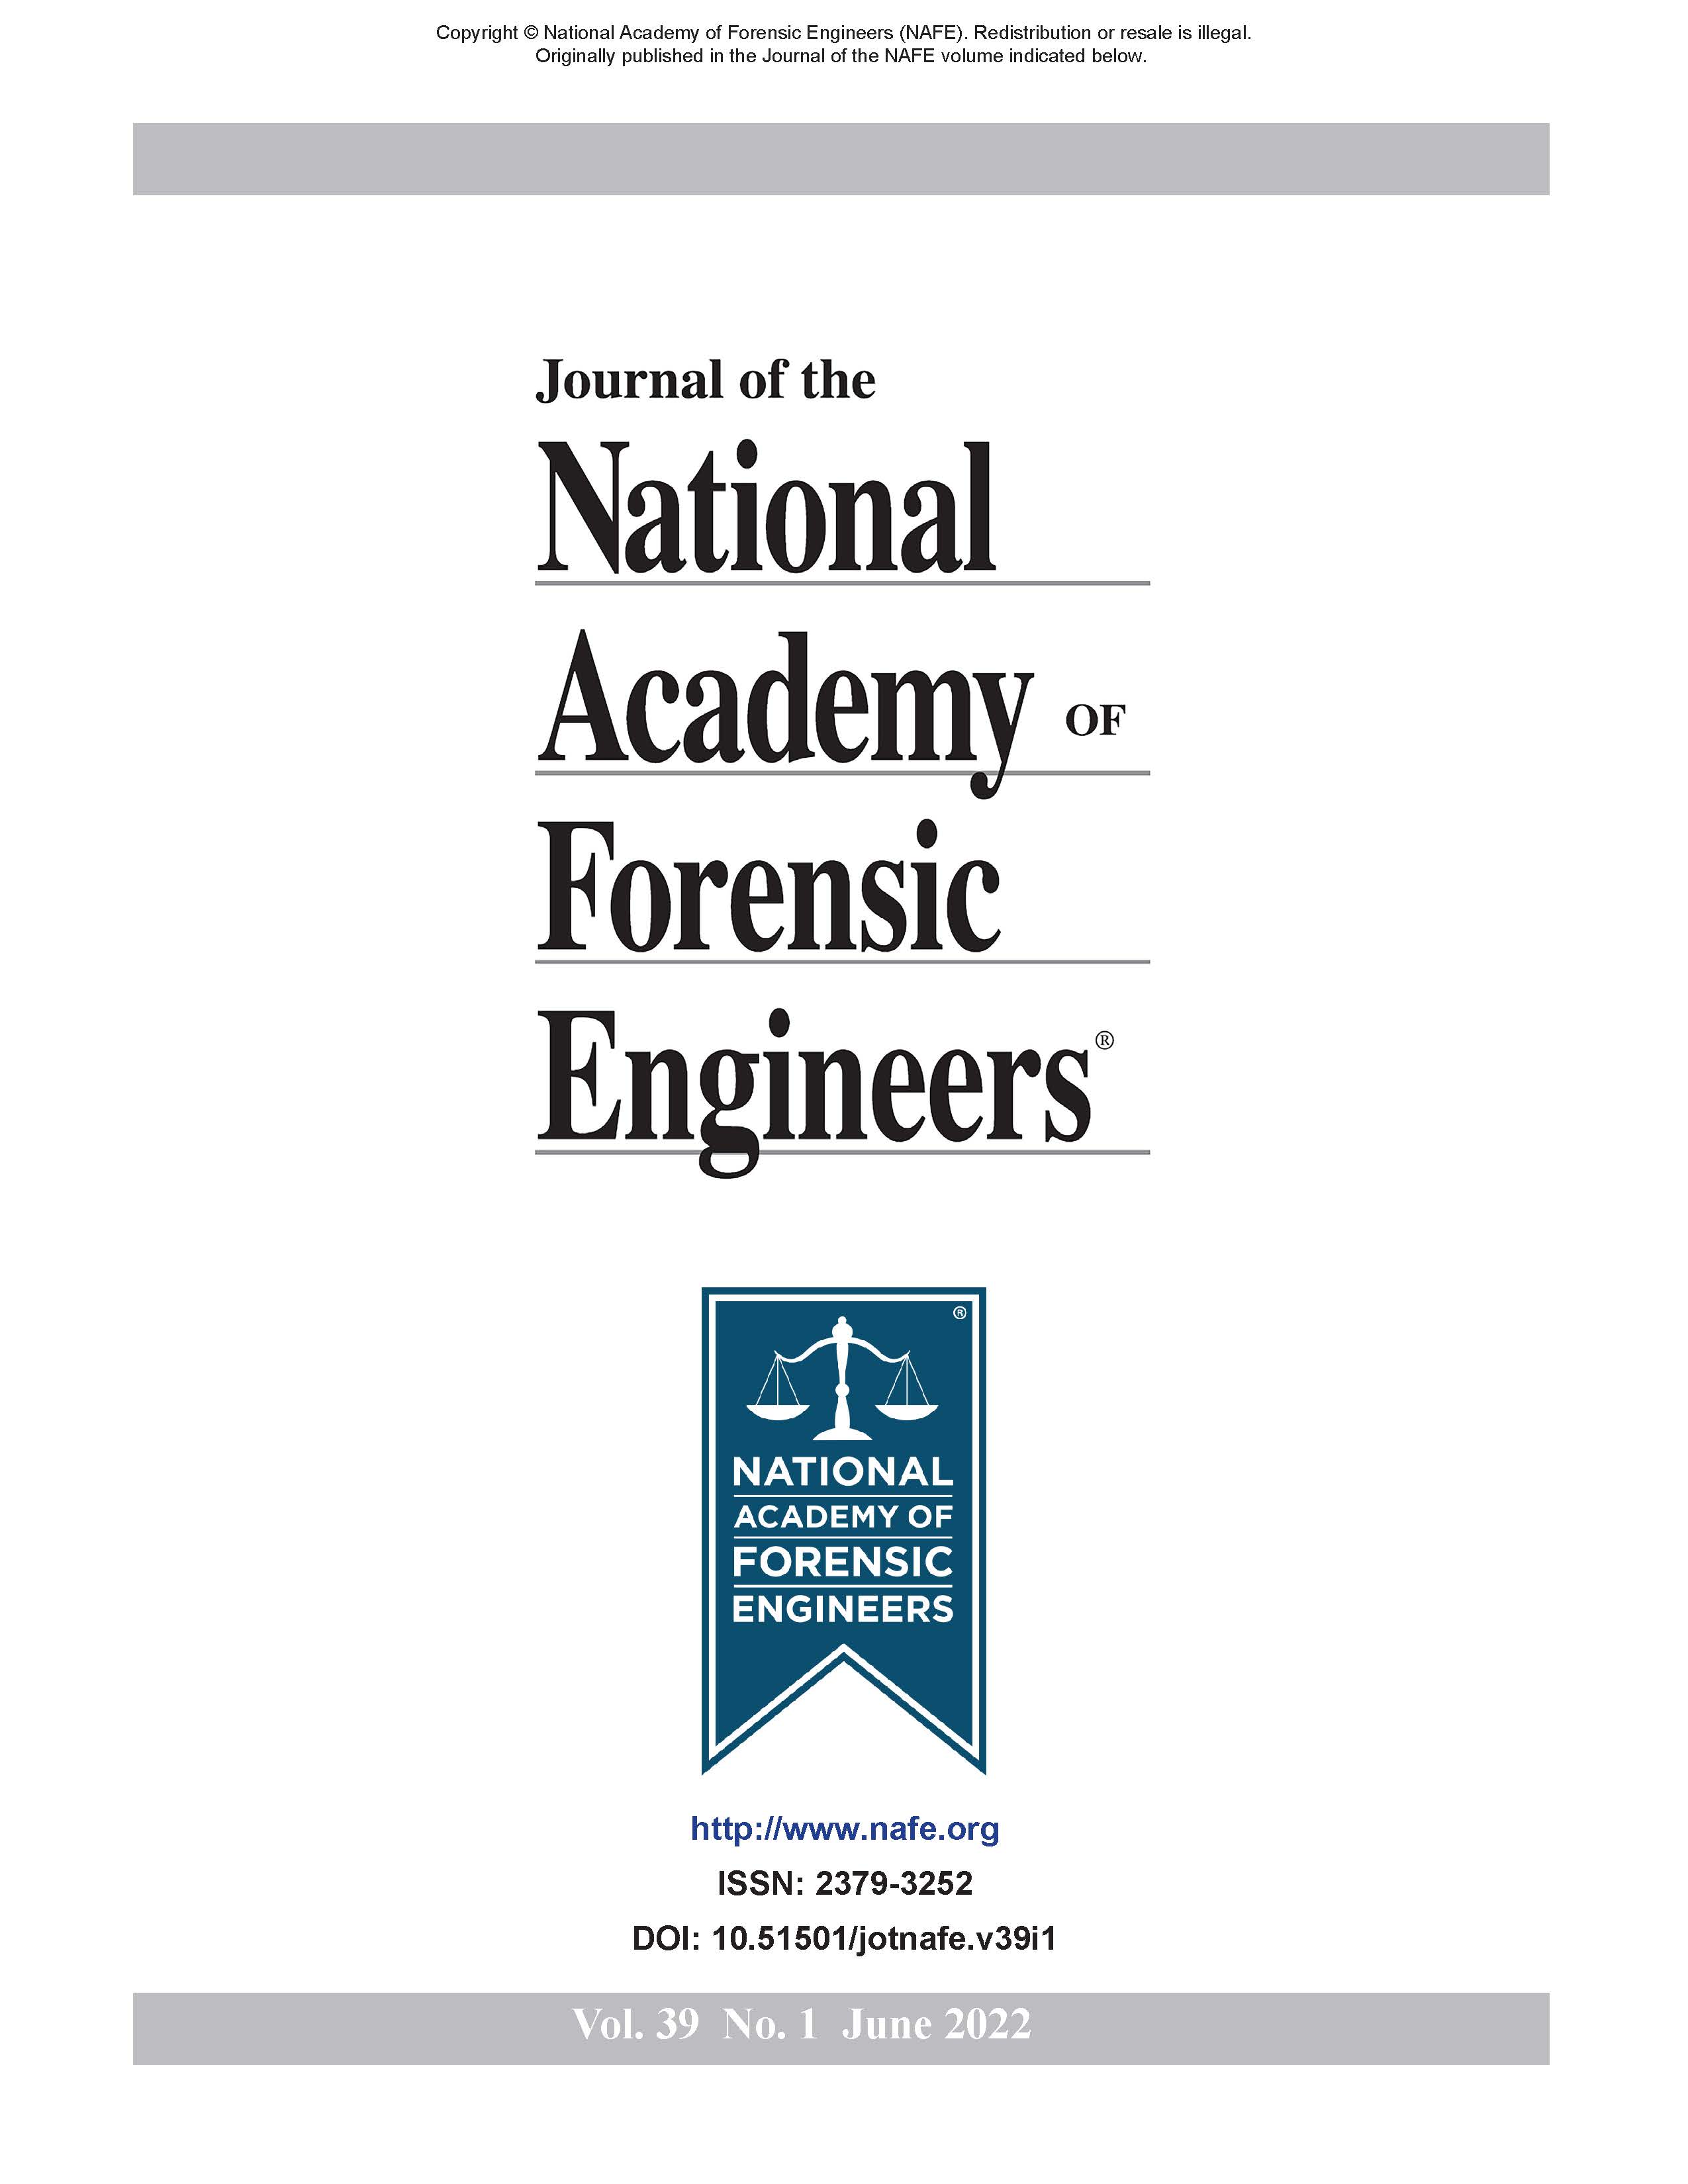 Journal of the National Academy of Forensic Engineers Vol. 39 No. 1